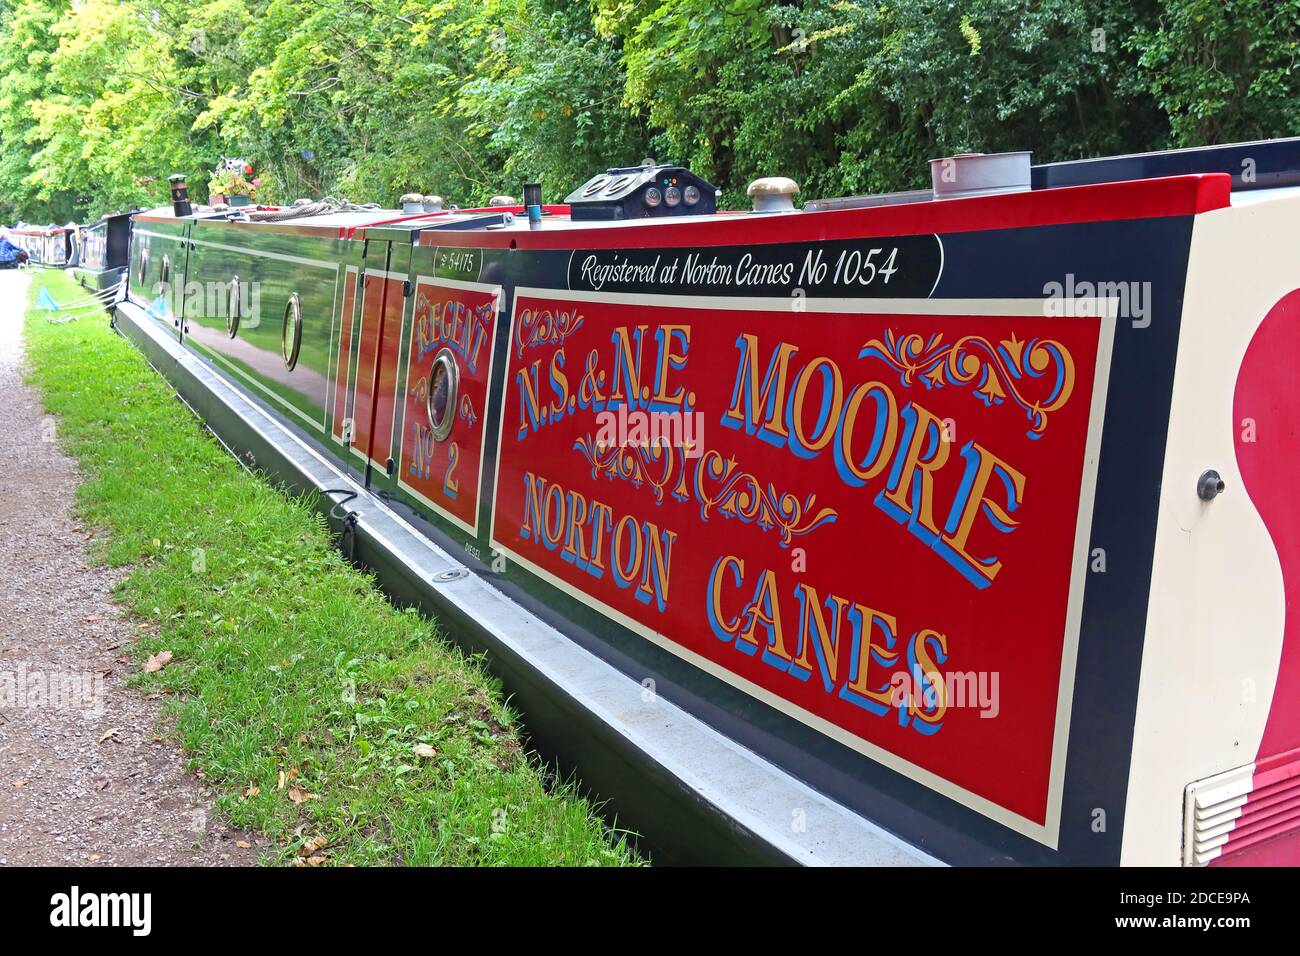 Canal Barge on Bridgwater Canal,Narrowboat, Regent No2,NS,NE,Moore,Norton Canes, Stock Photo